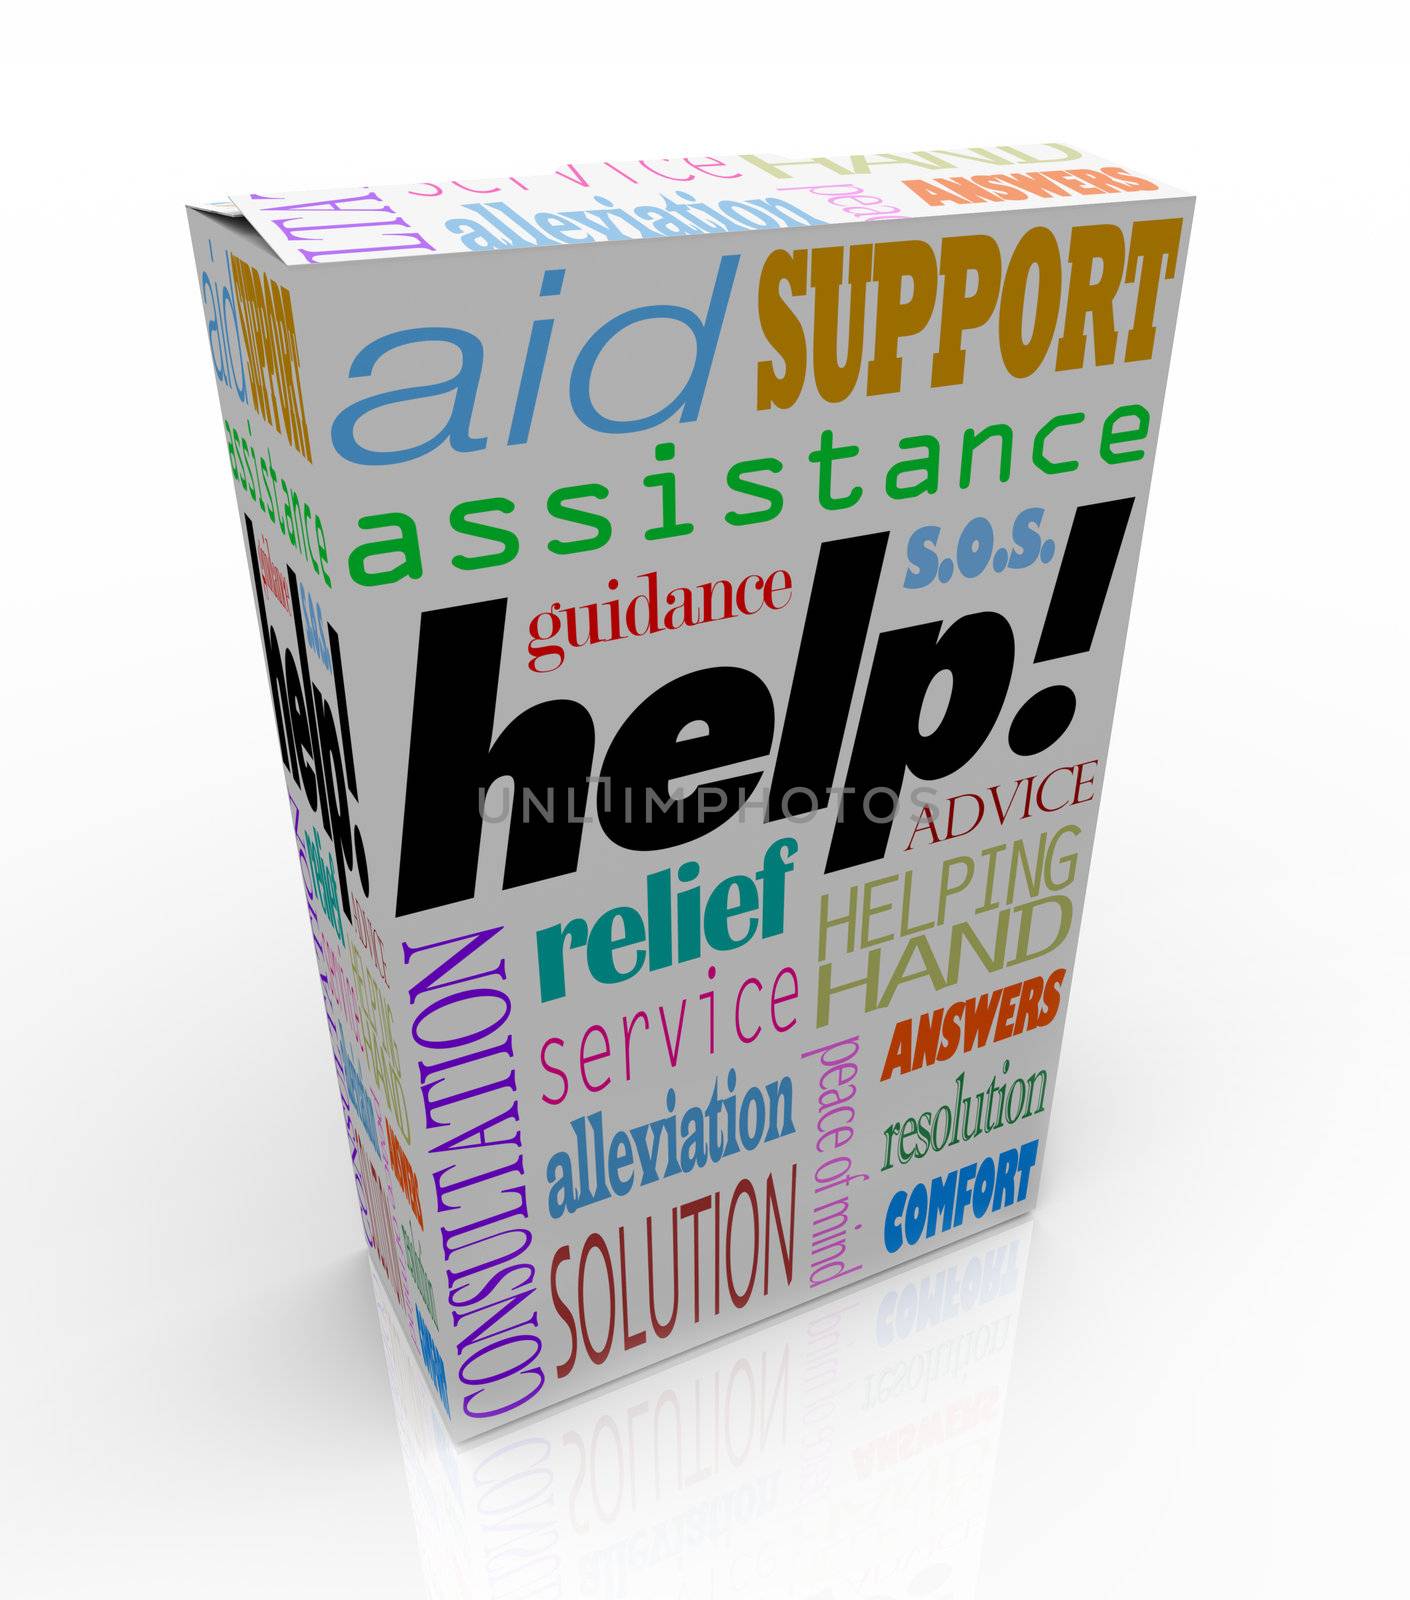 The word Help and many others representing customer support -- assistance, relief, service, consultation, solution, peace of mind, assistance, guidance, resolution, answers, comfort, advice, and more -- on a white product box